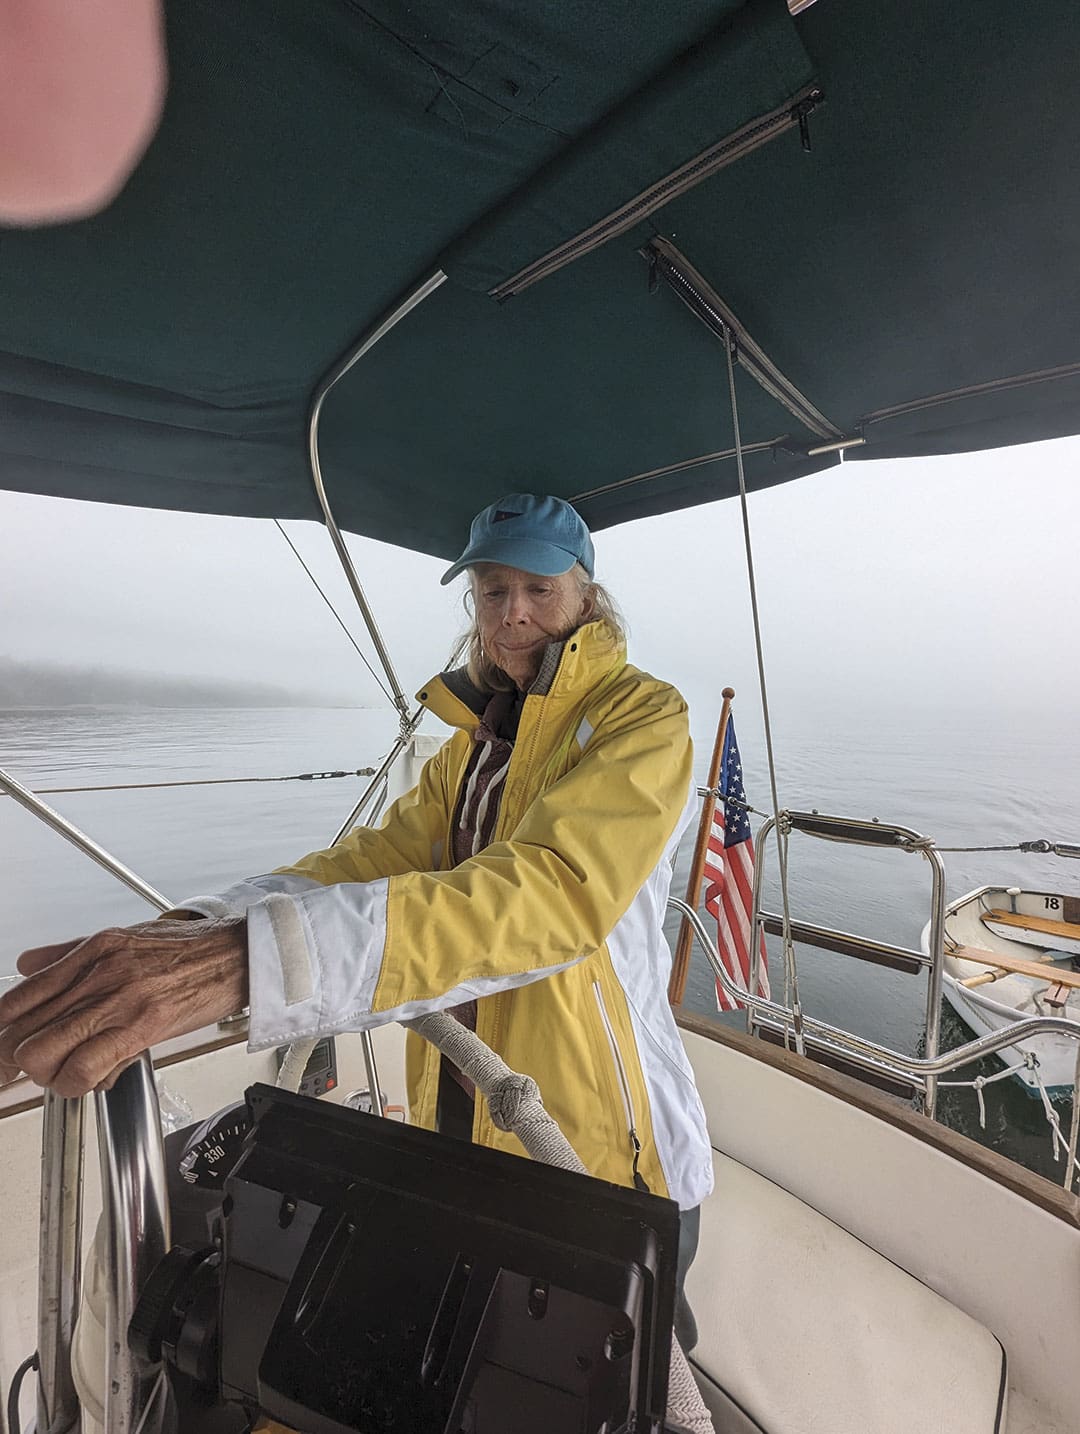 Ann Hoffner steering while being prompted by data from the chartplotter.